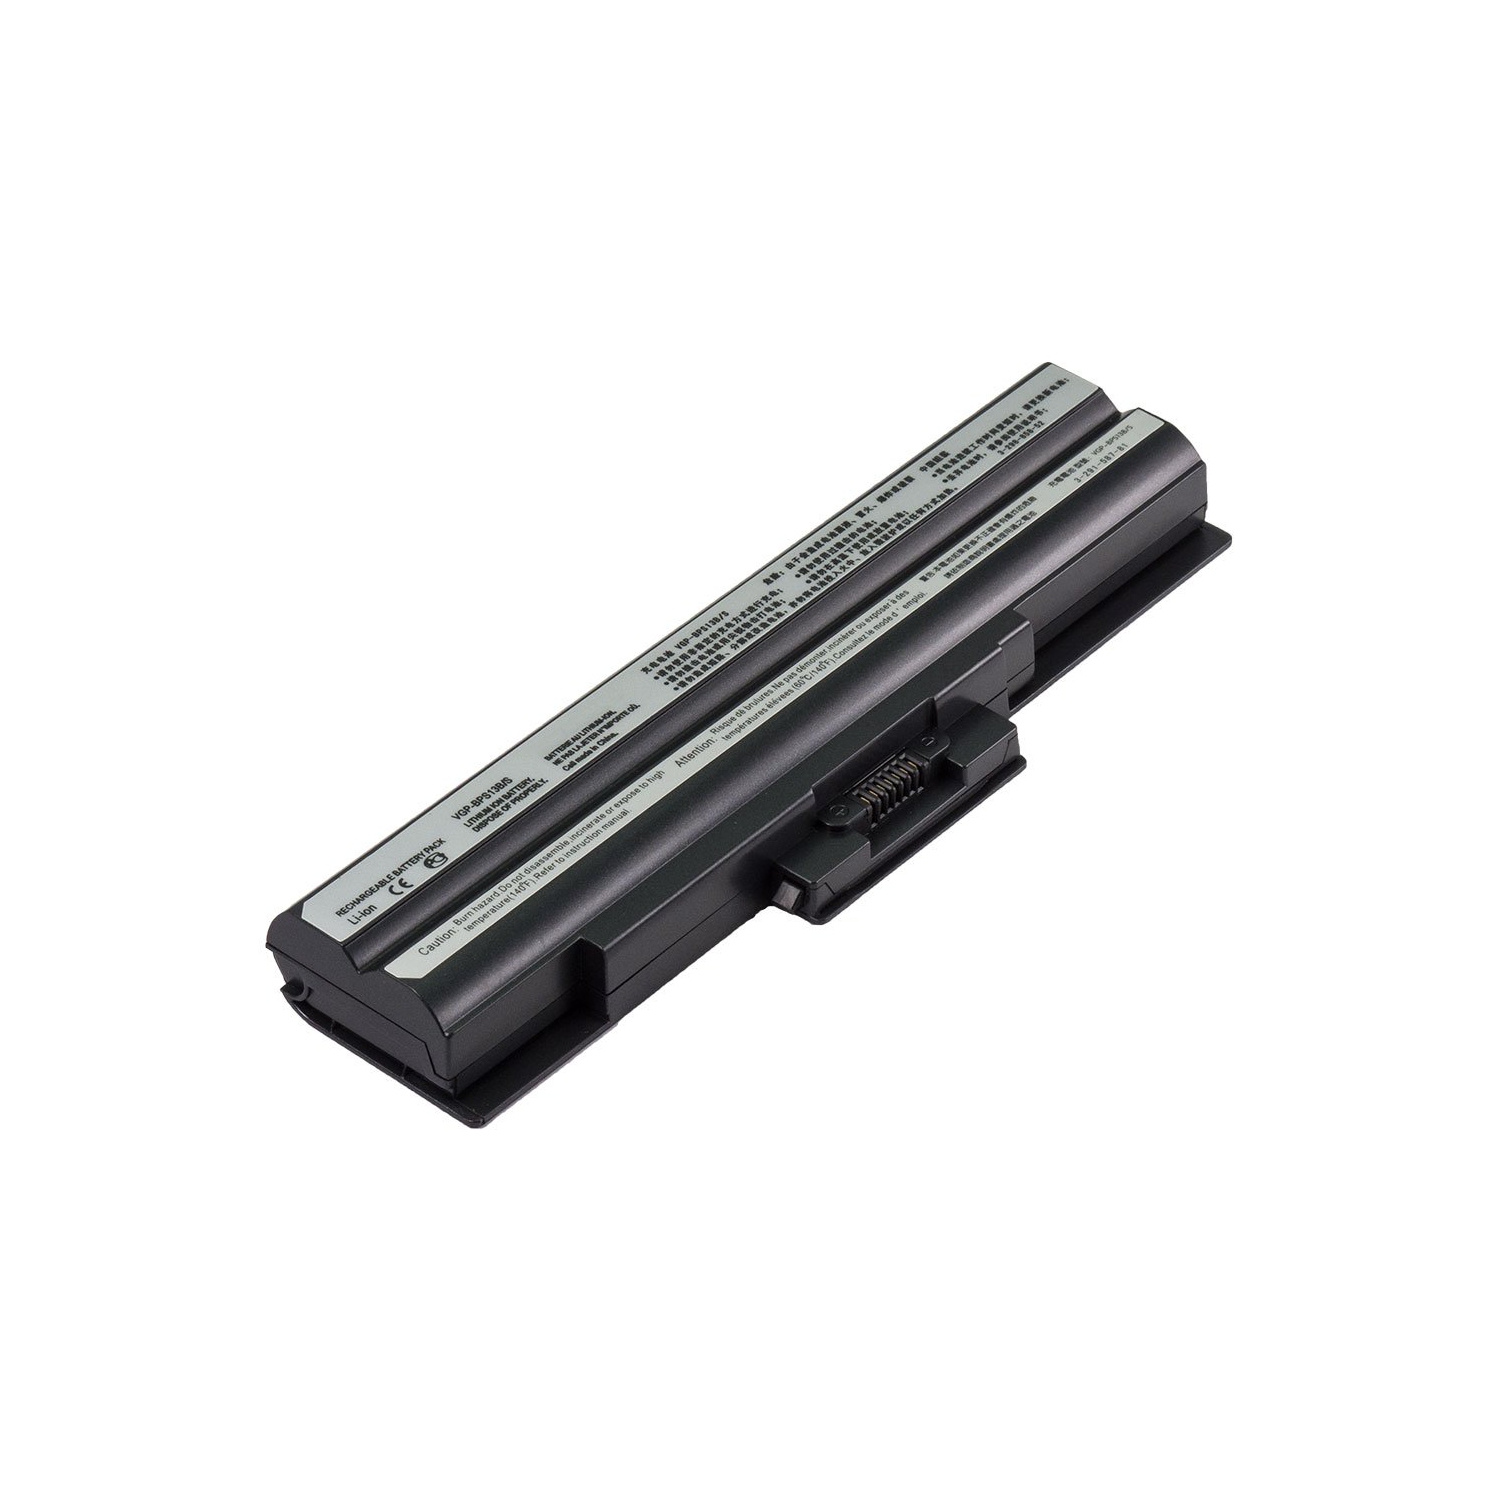 Laptop Battery Replacement for Sony VAIO VGN-BZ569P36, VGP-BPS13, VGP-BPS13/S, VGP-BPS13A/Q, VGP-BPS13B/B, VGP-BSP13/S